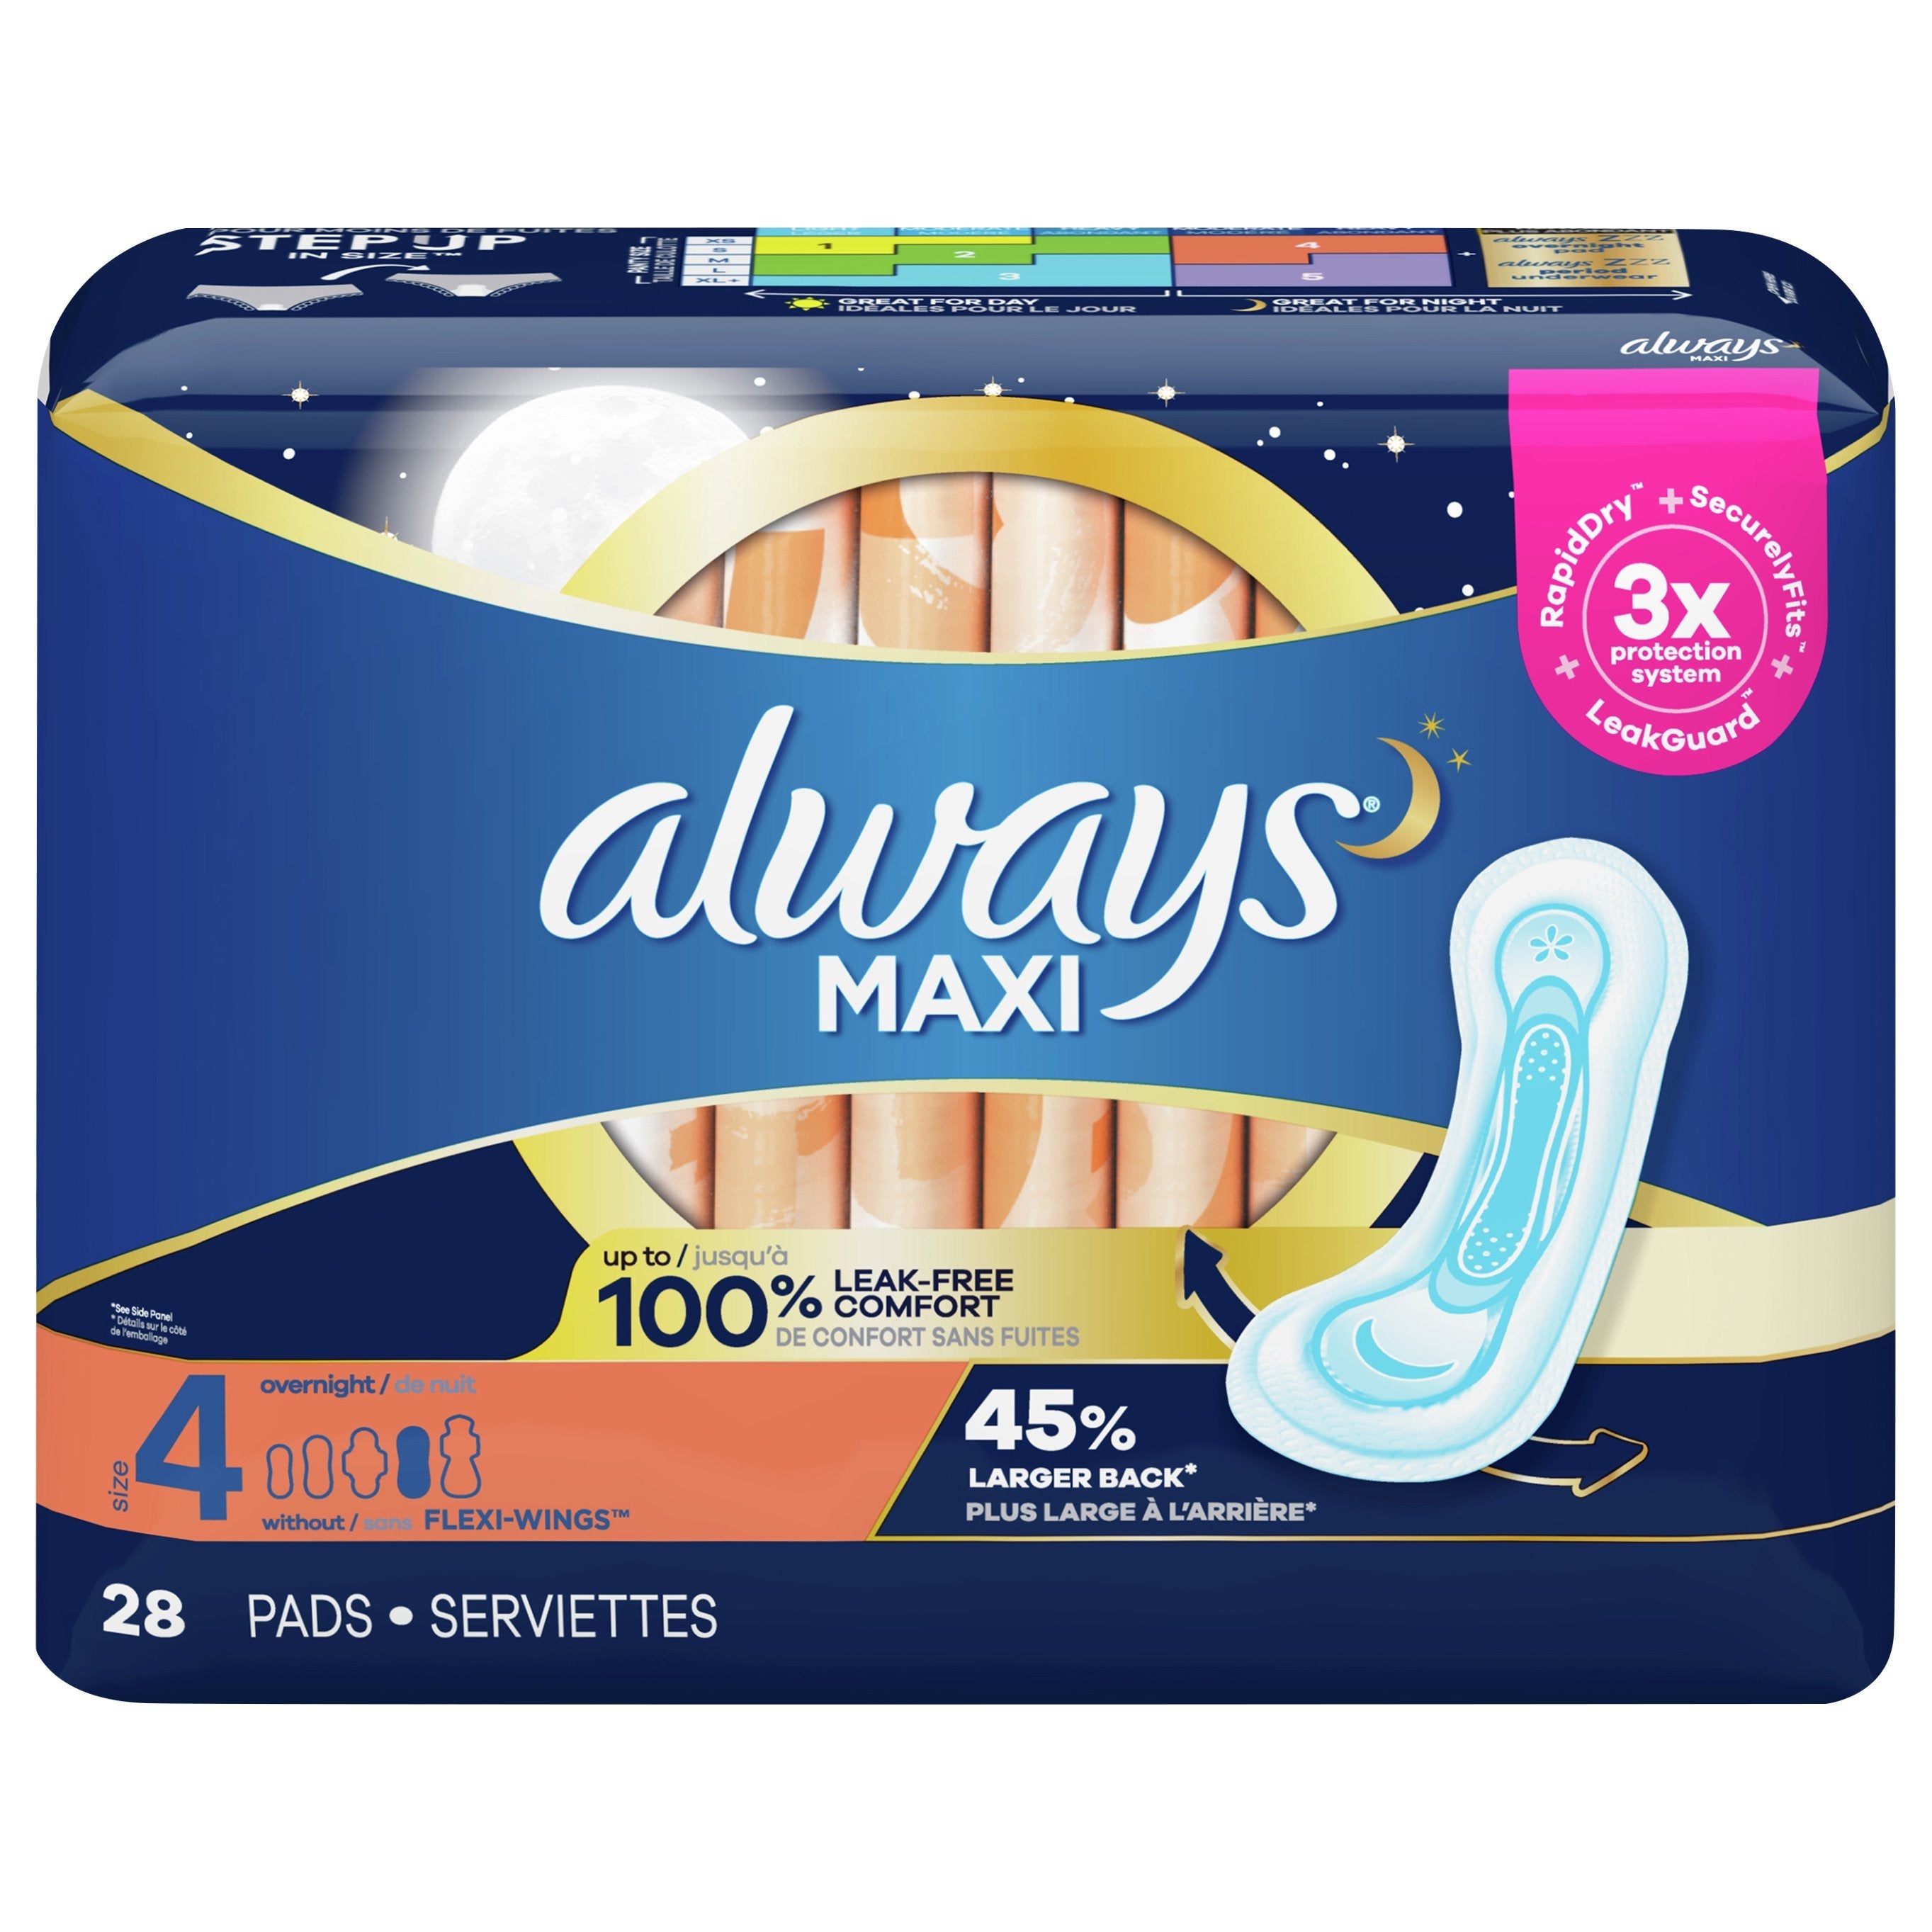 U By Kotex Security Maxi Pads Overnight - 28ct